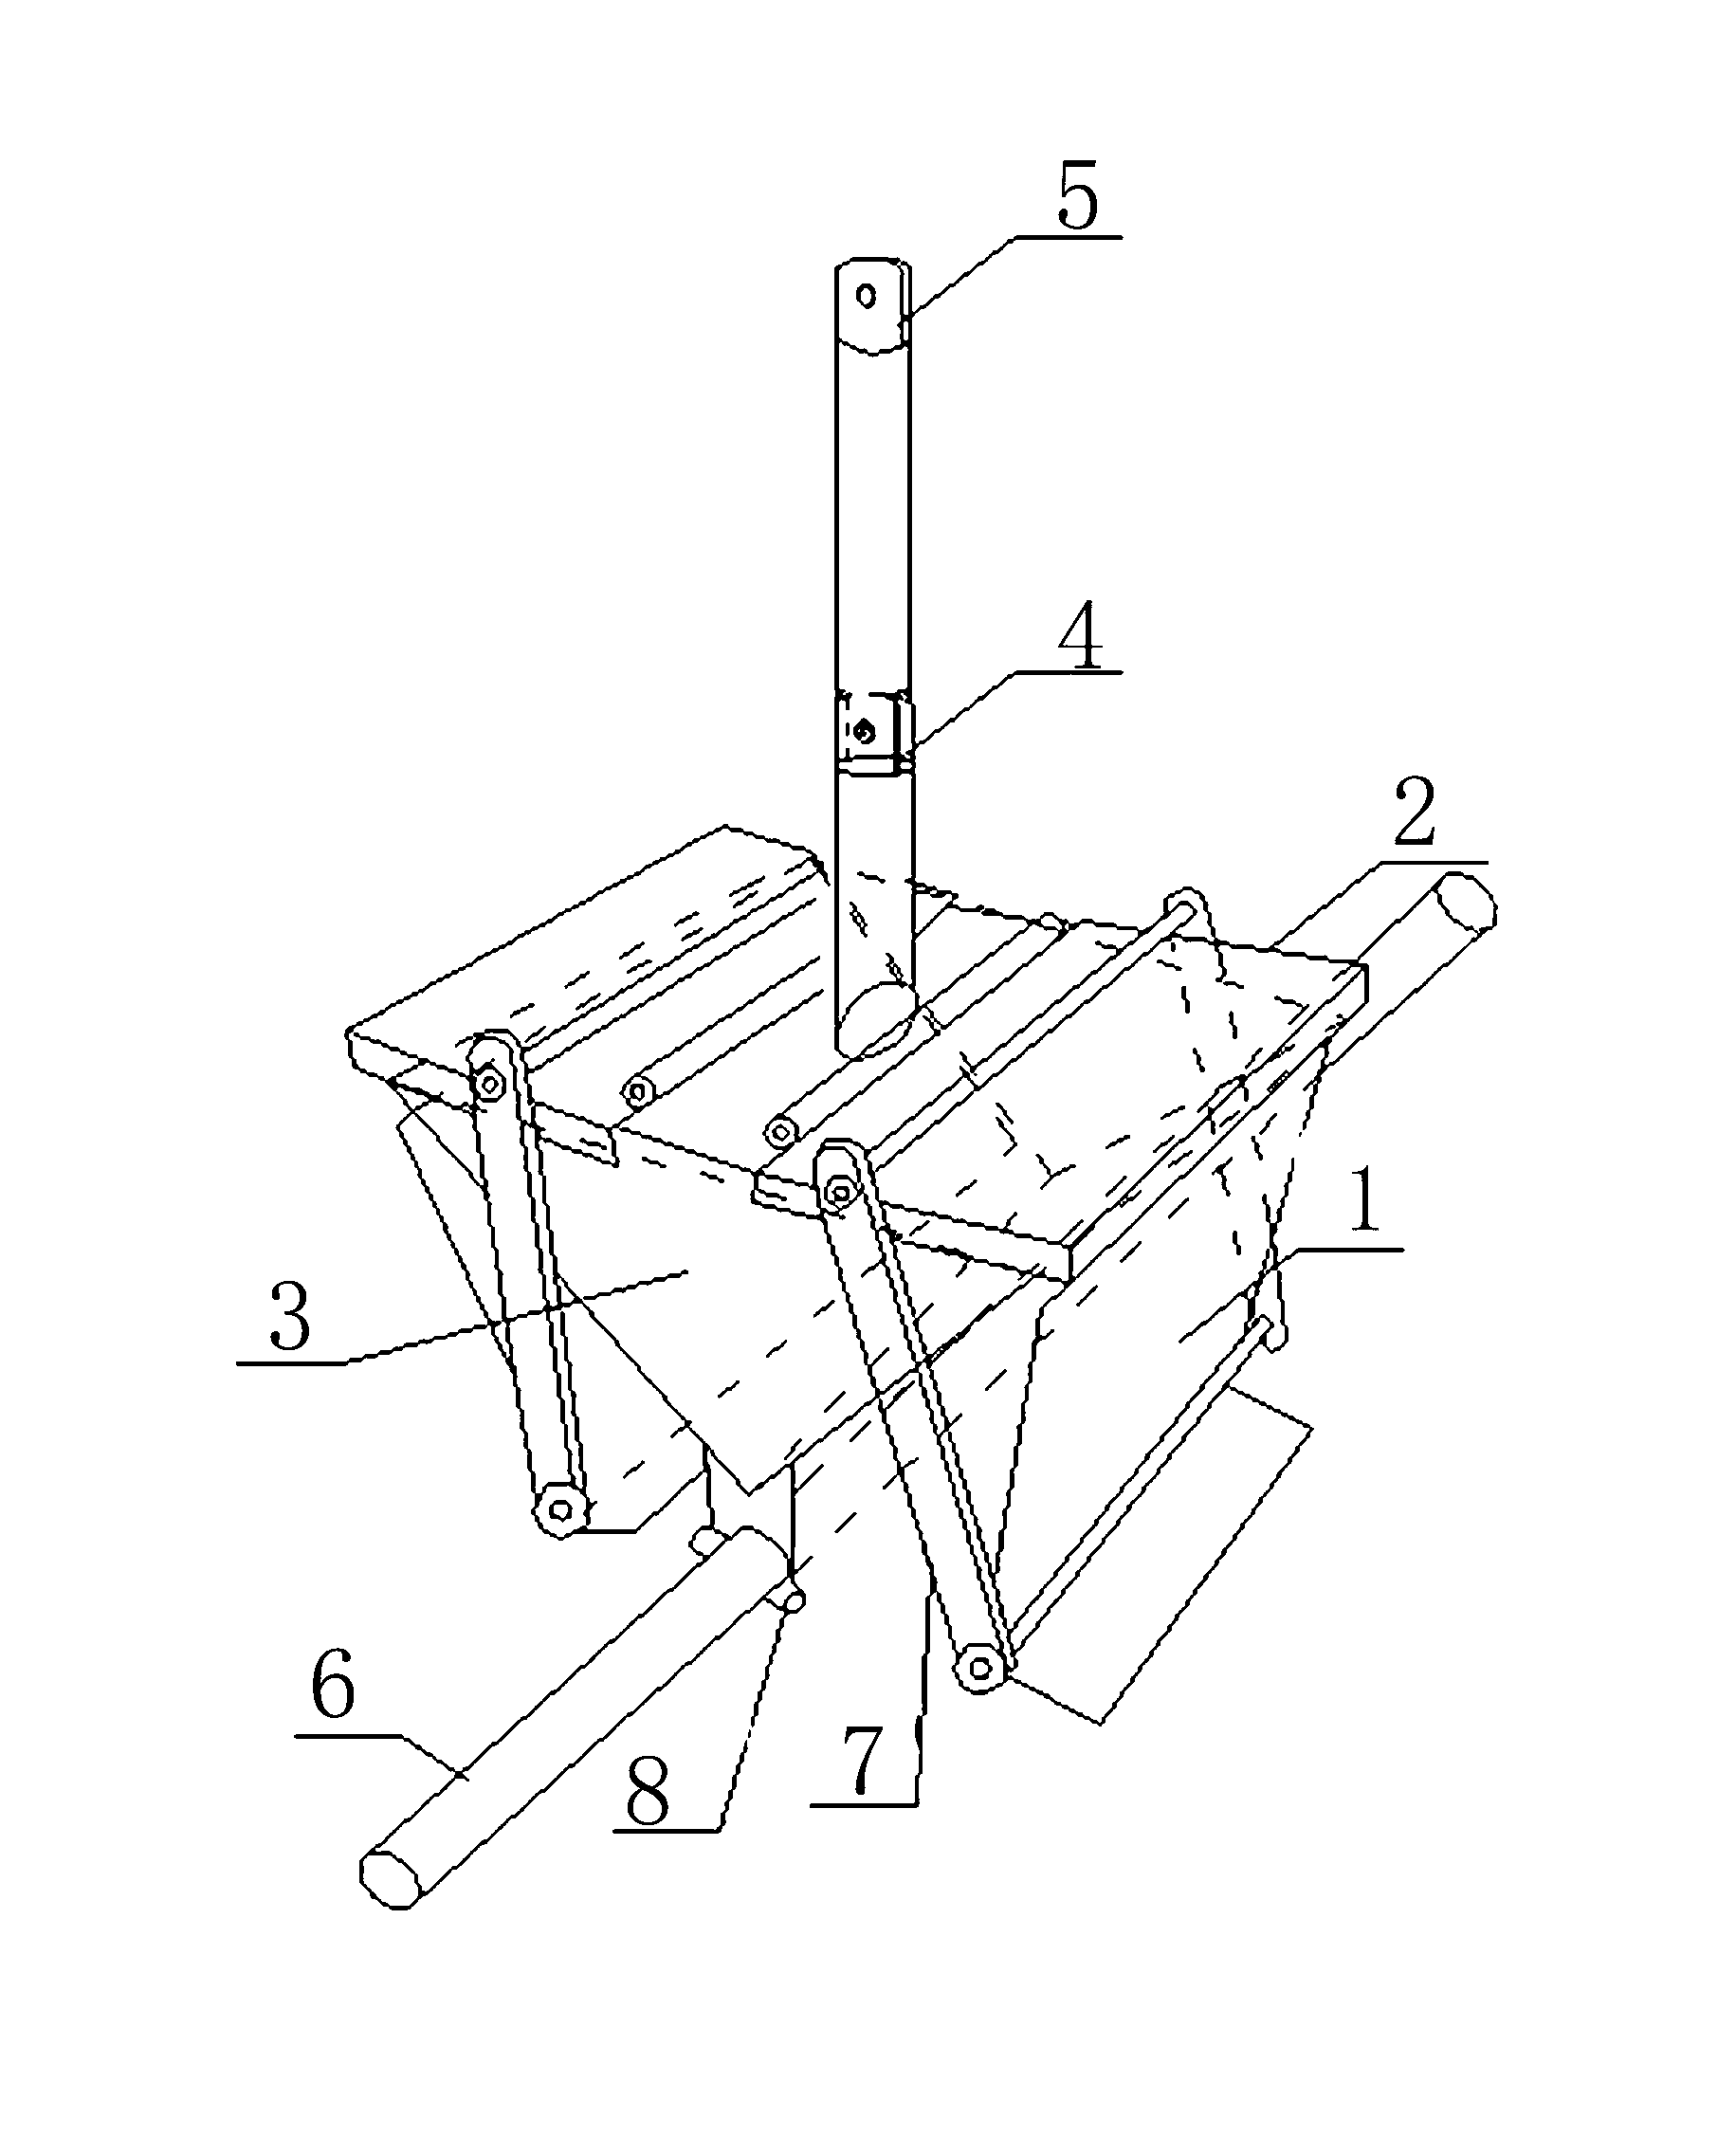 Anchor type surface sediment collection device